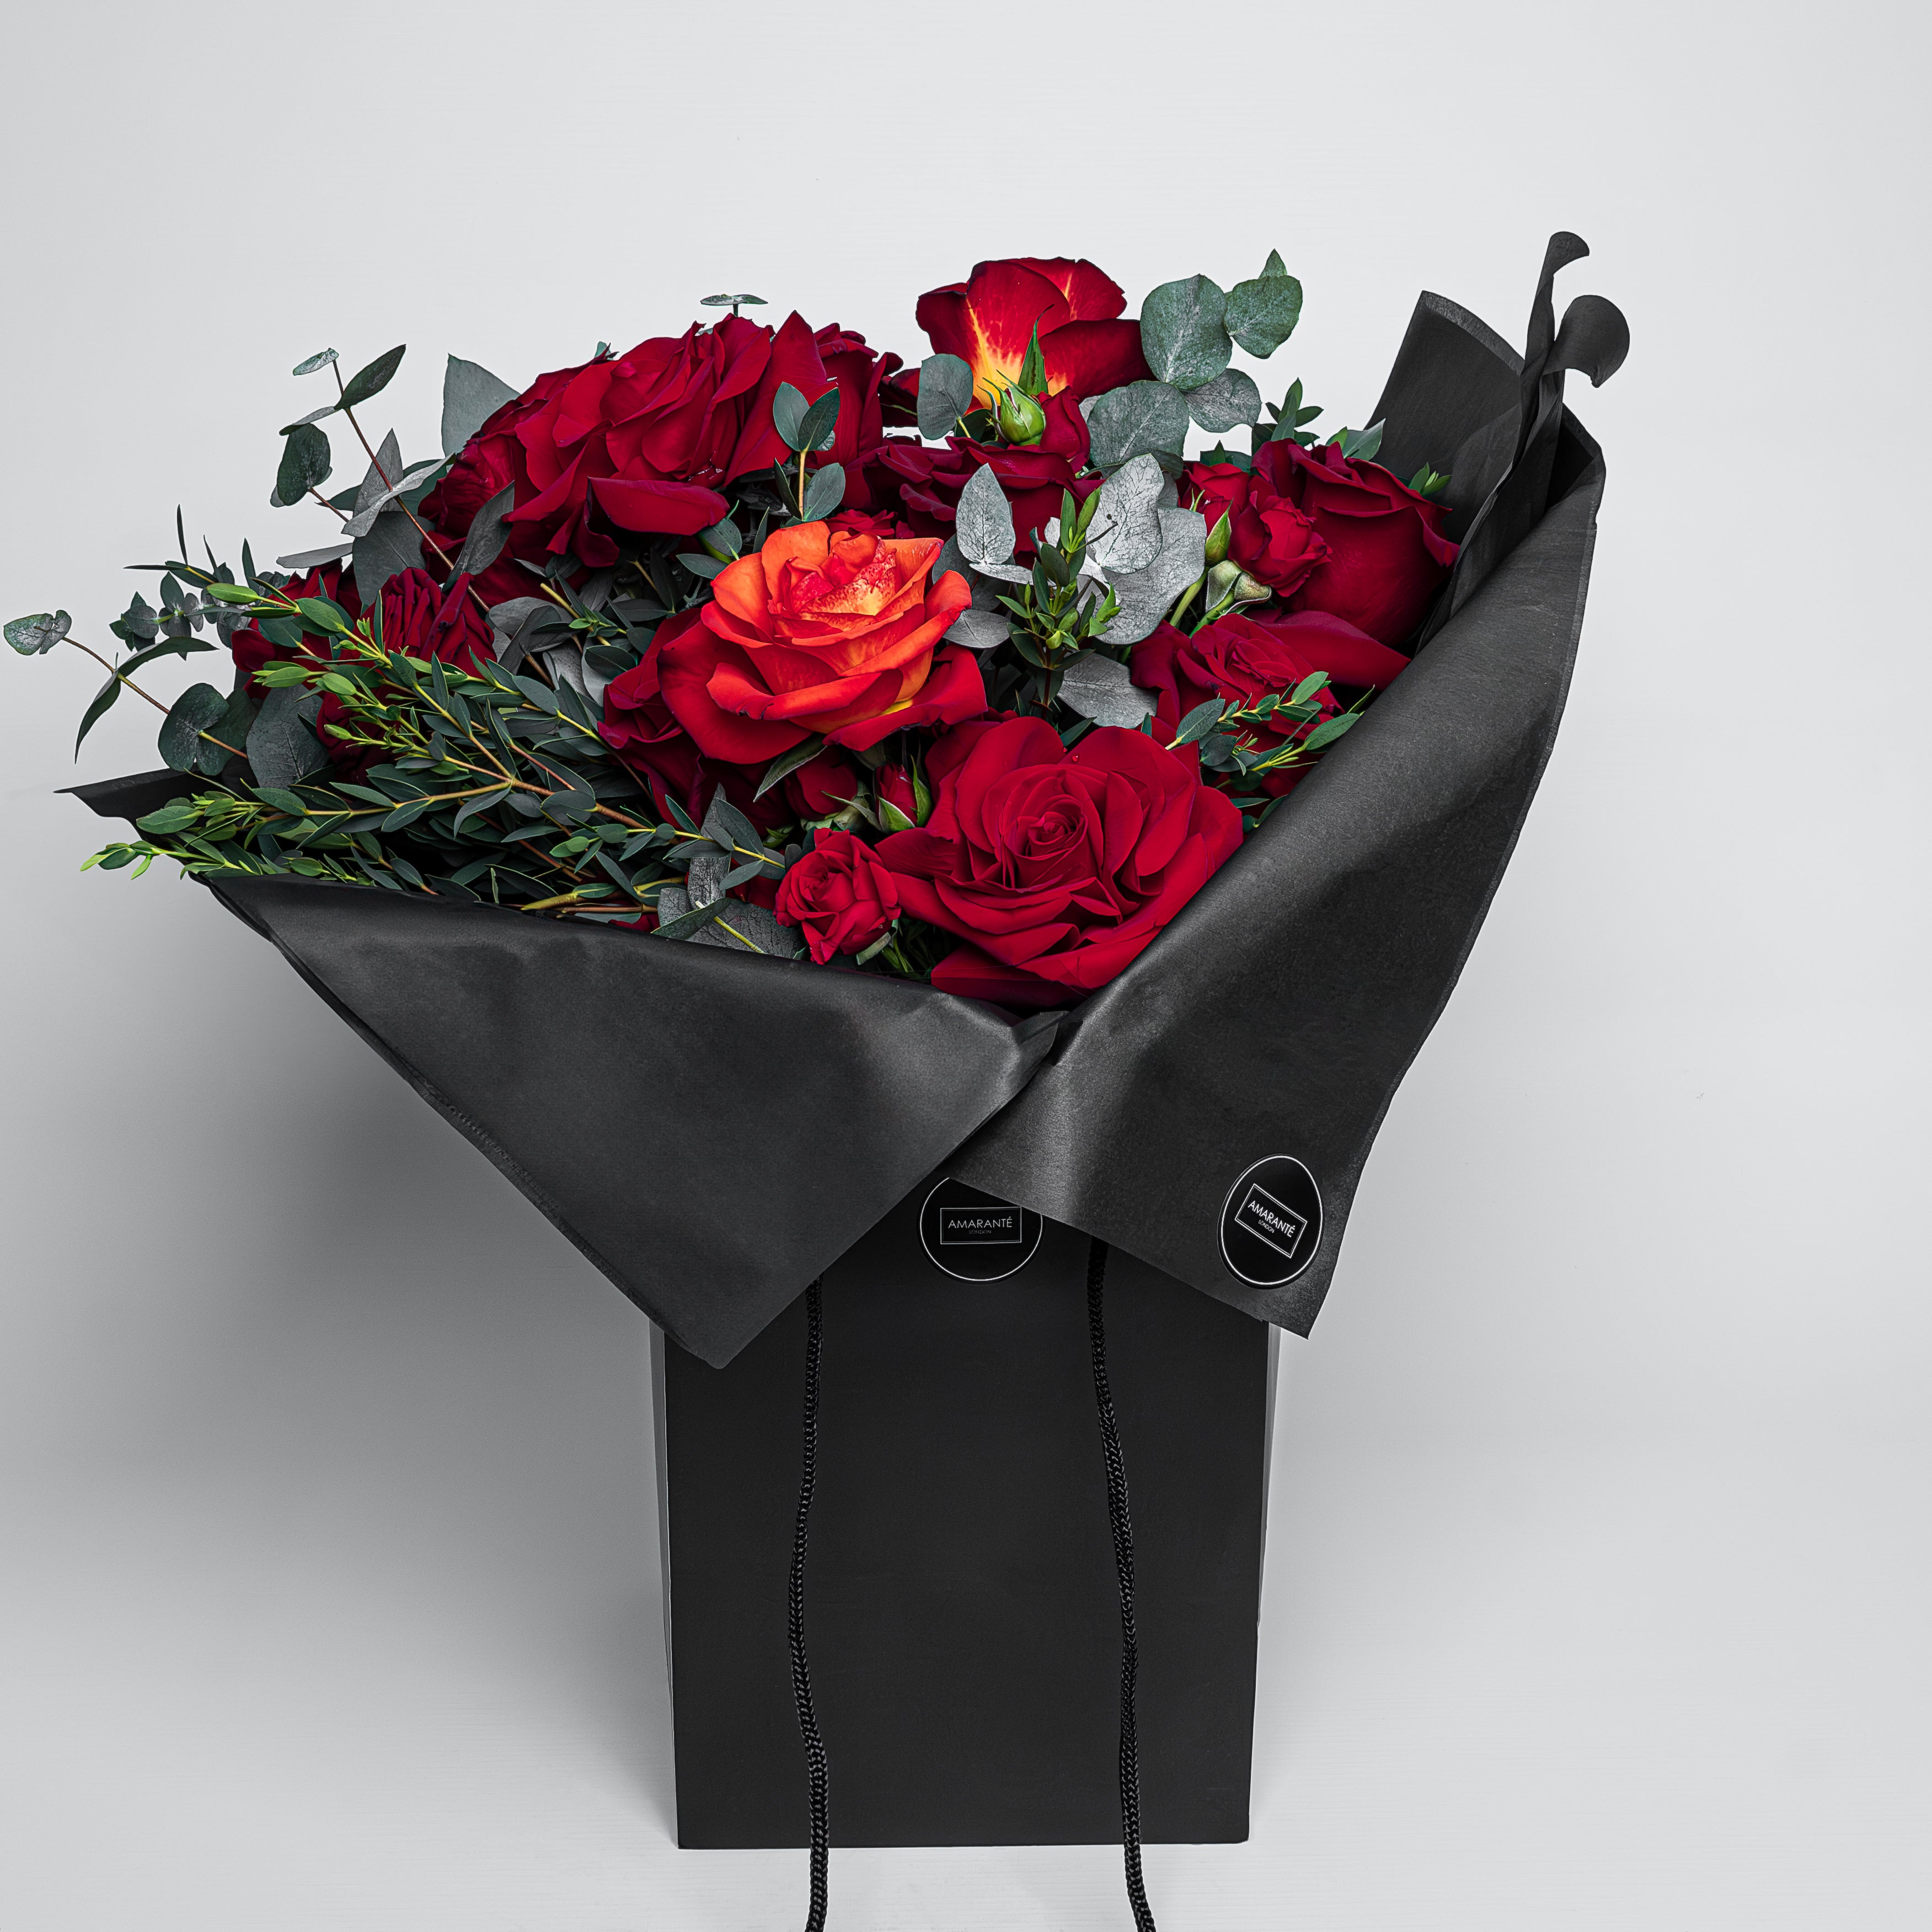 An exquisite Valentine&#39;s Day Bouquet of fresh roses in an elegant black gift box from Amarante London. The luxurious bouquet of red roses is a sophisticated and beautifully arranged bouquet, for a timeless expression of love and affection. The stems display a polished and refined green, adding to the bouquet&#39;s elegance, perfect for Vday - Free UK Delivery. Celebrate Valentine&#39;s with this elegant, graceful fresh flower arrangement!